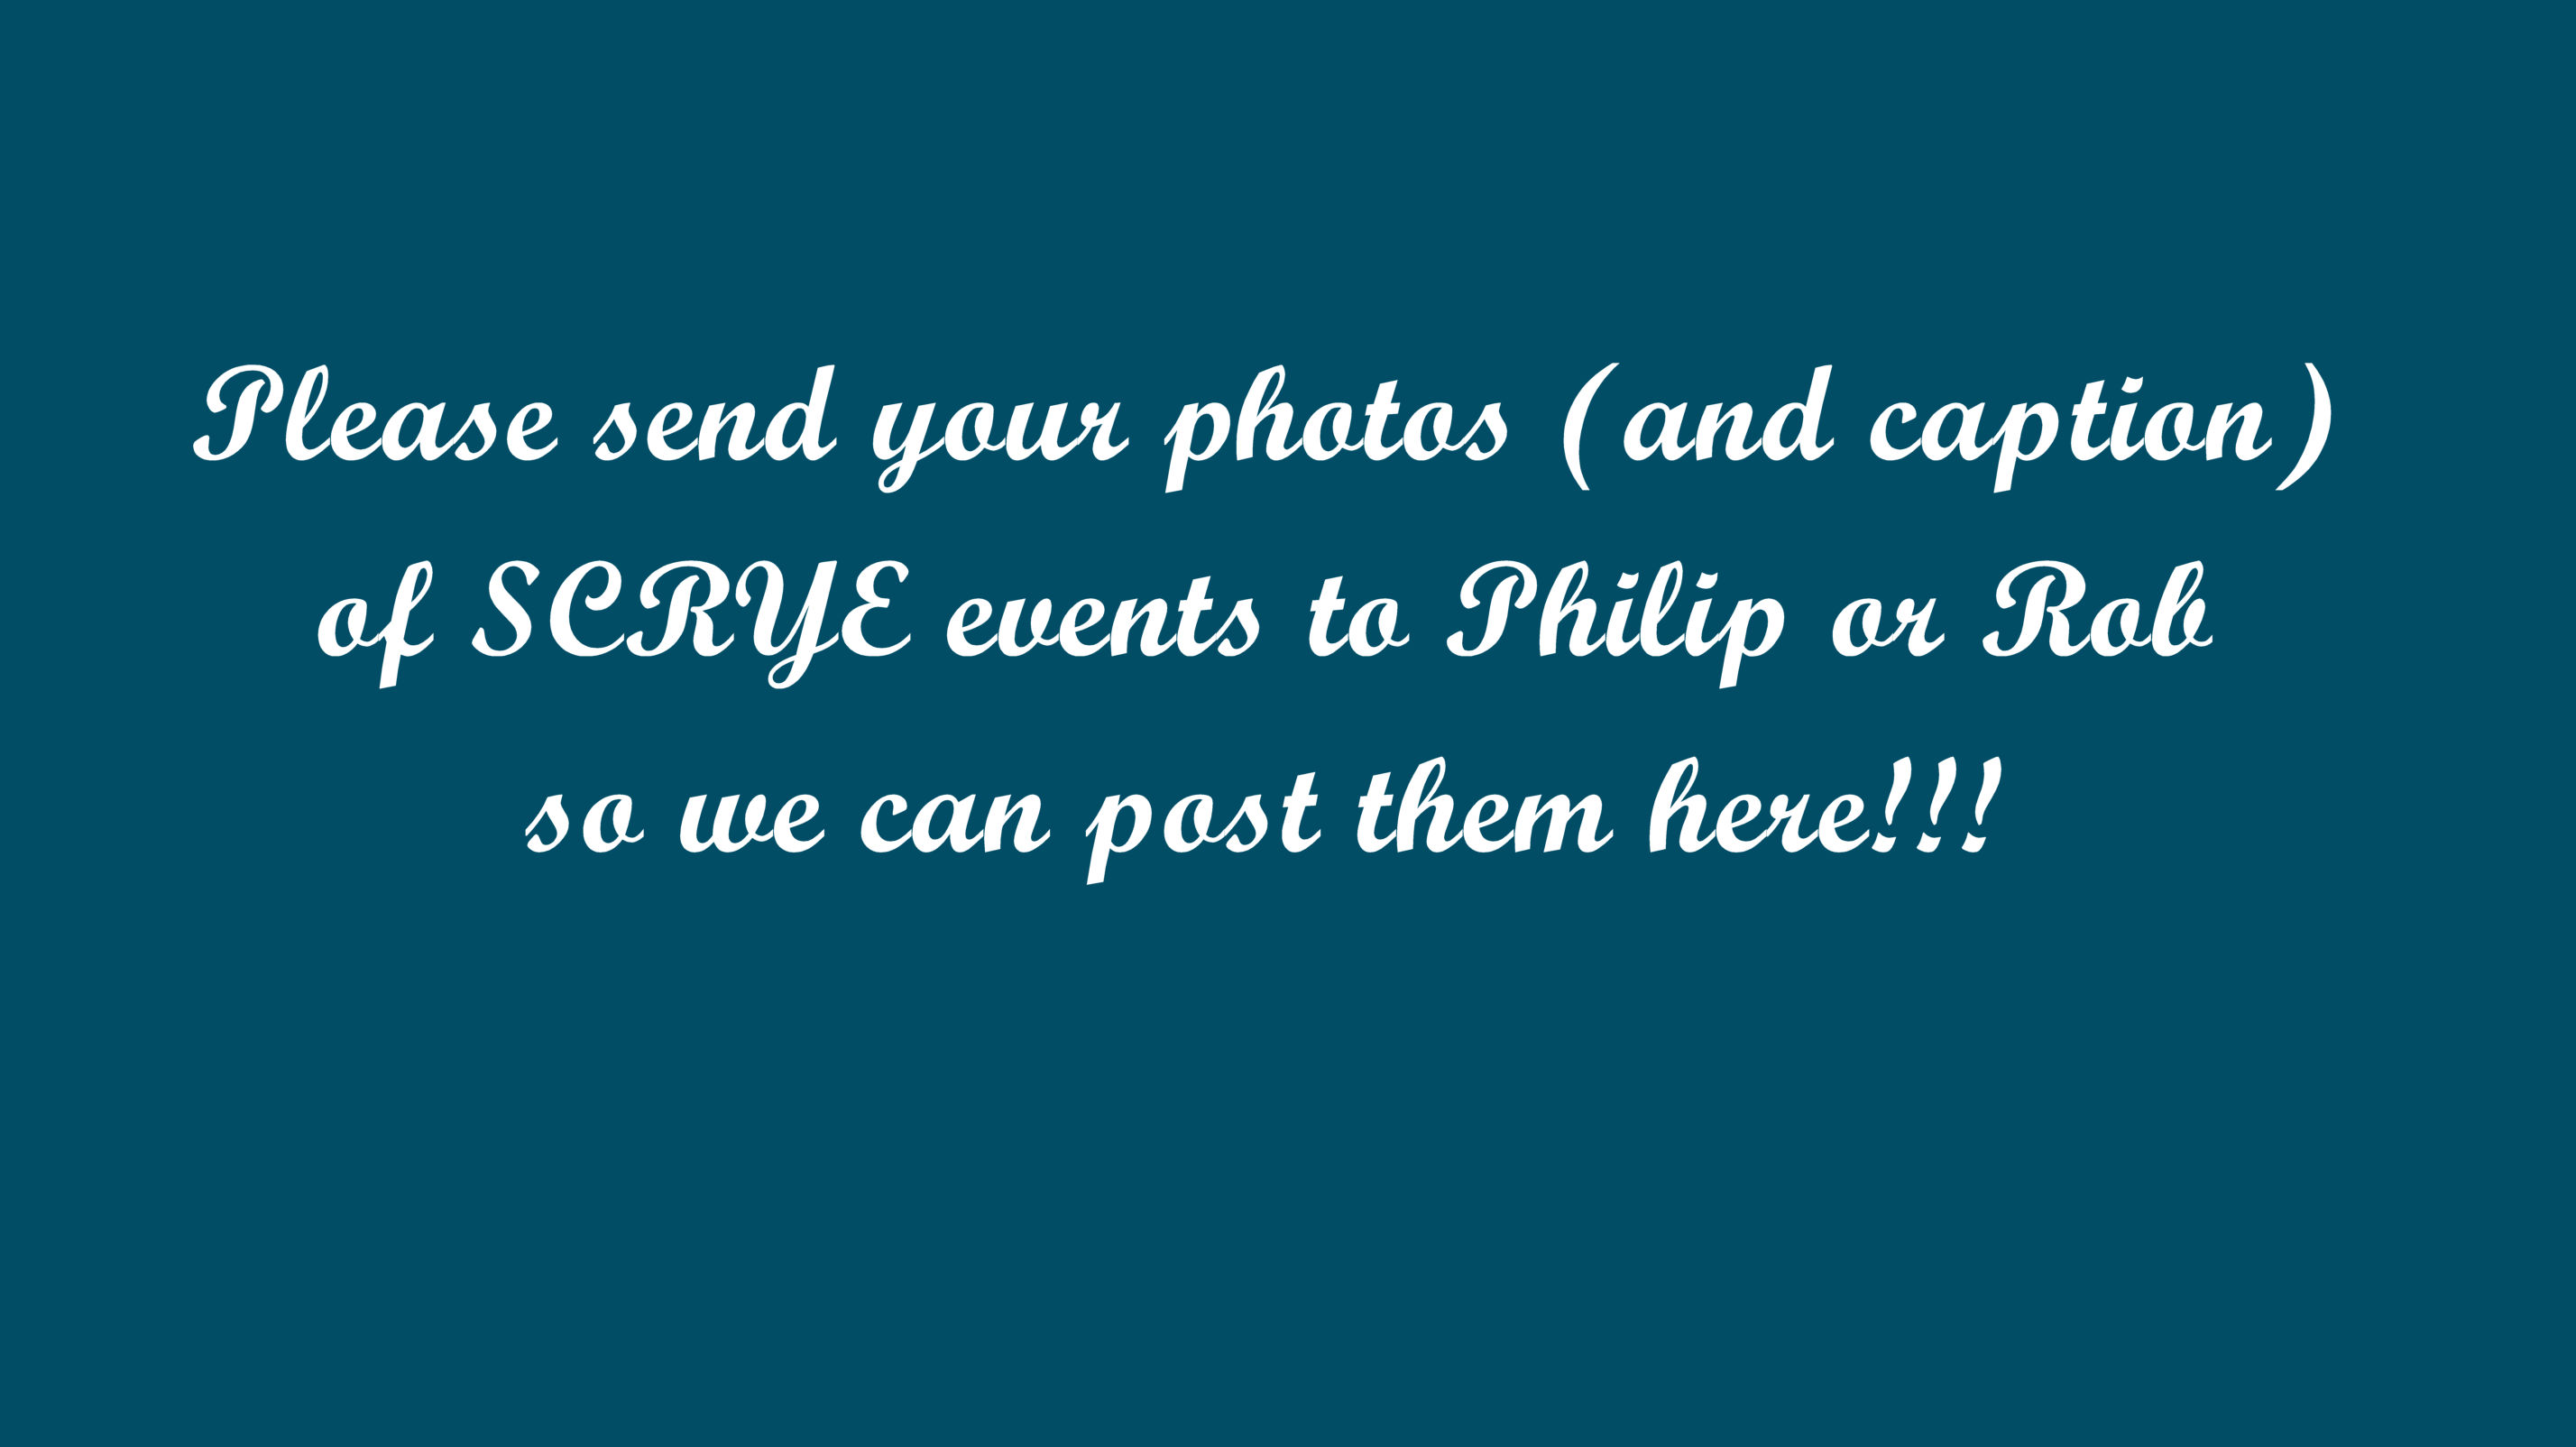 Please send your photos (and caption) of SCRYE events to Philip or Rob so we can post them here!!!